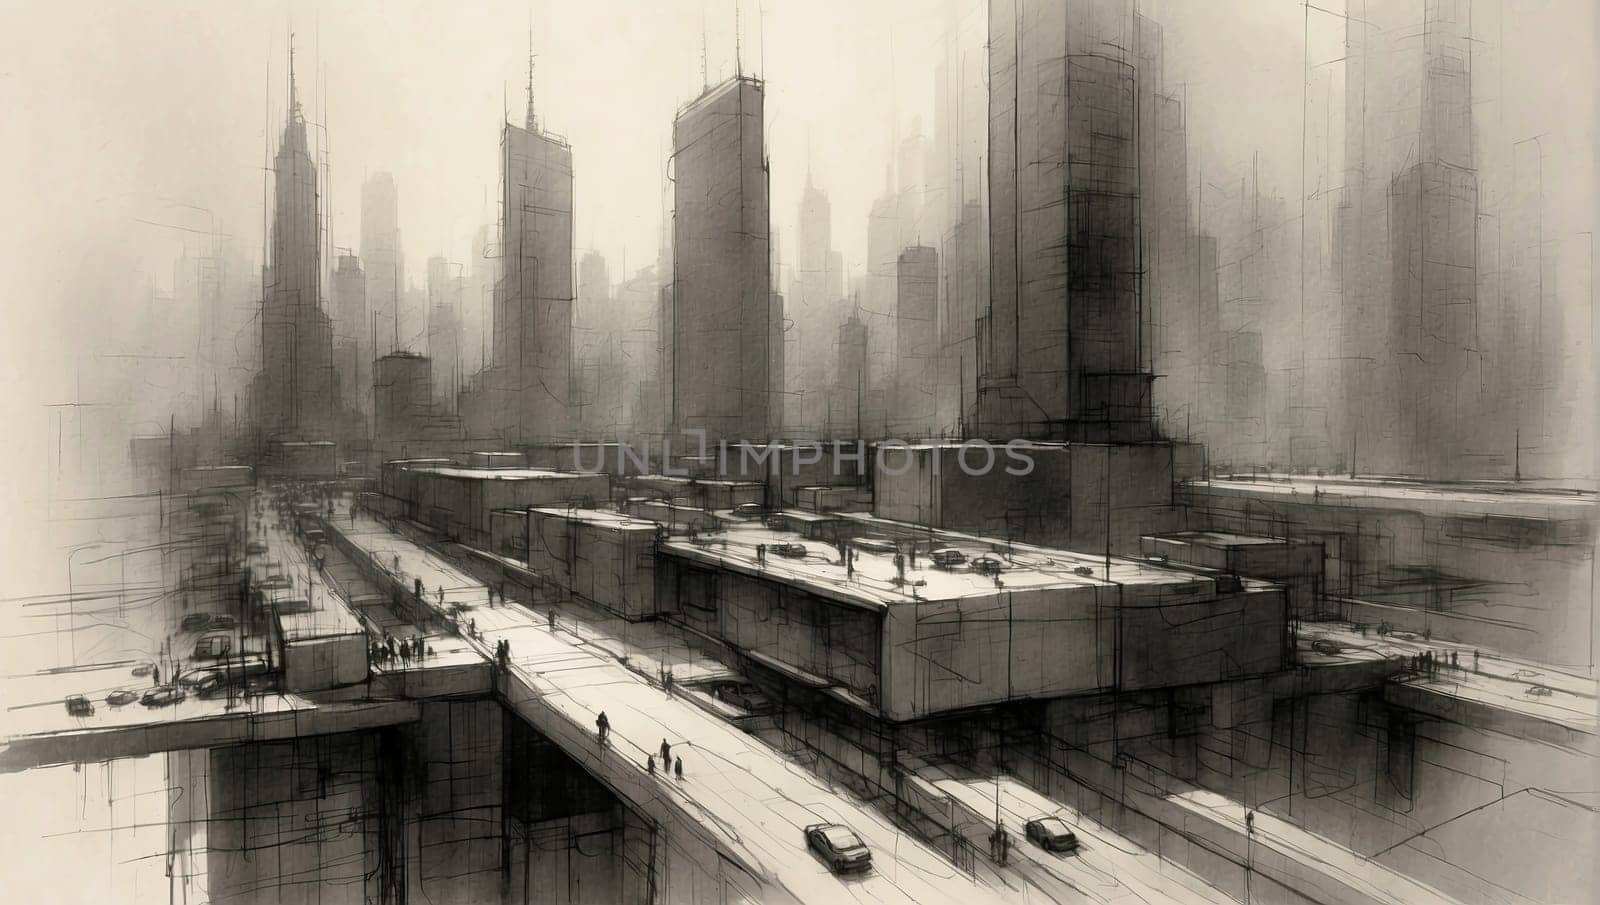 Megapolis painted in black and white colors by applesstock